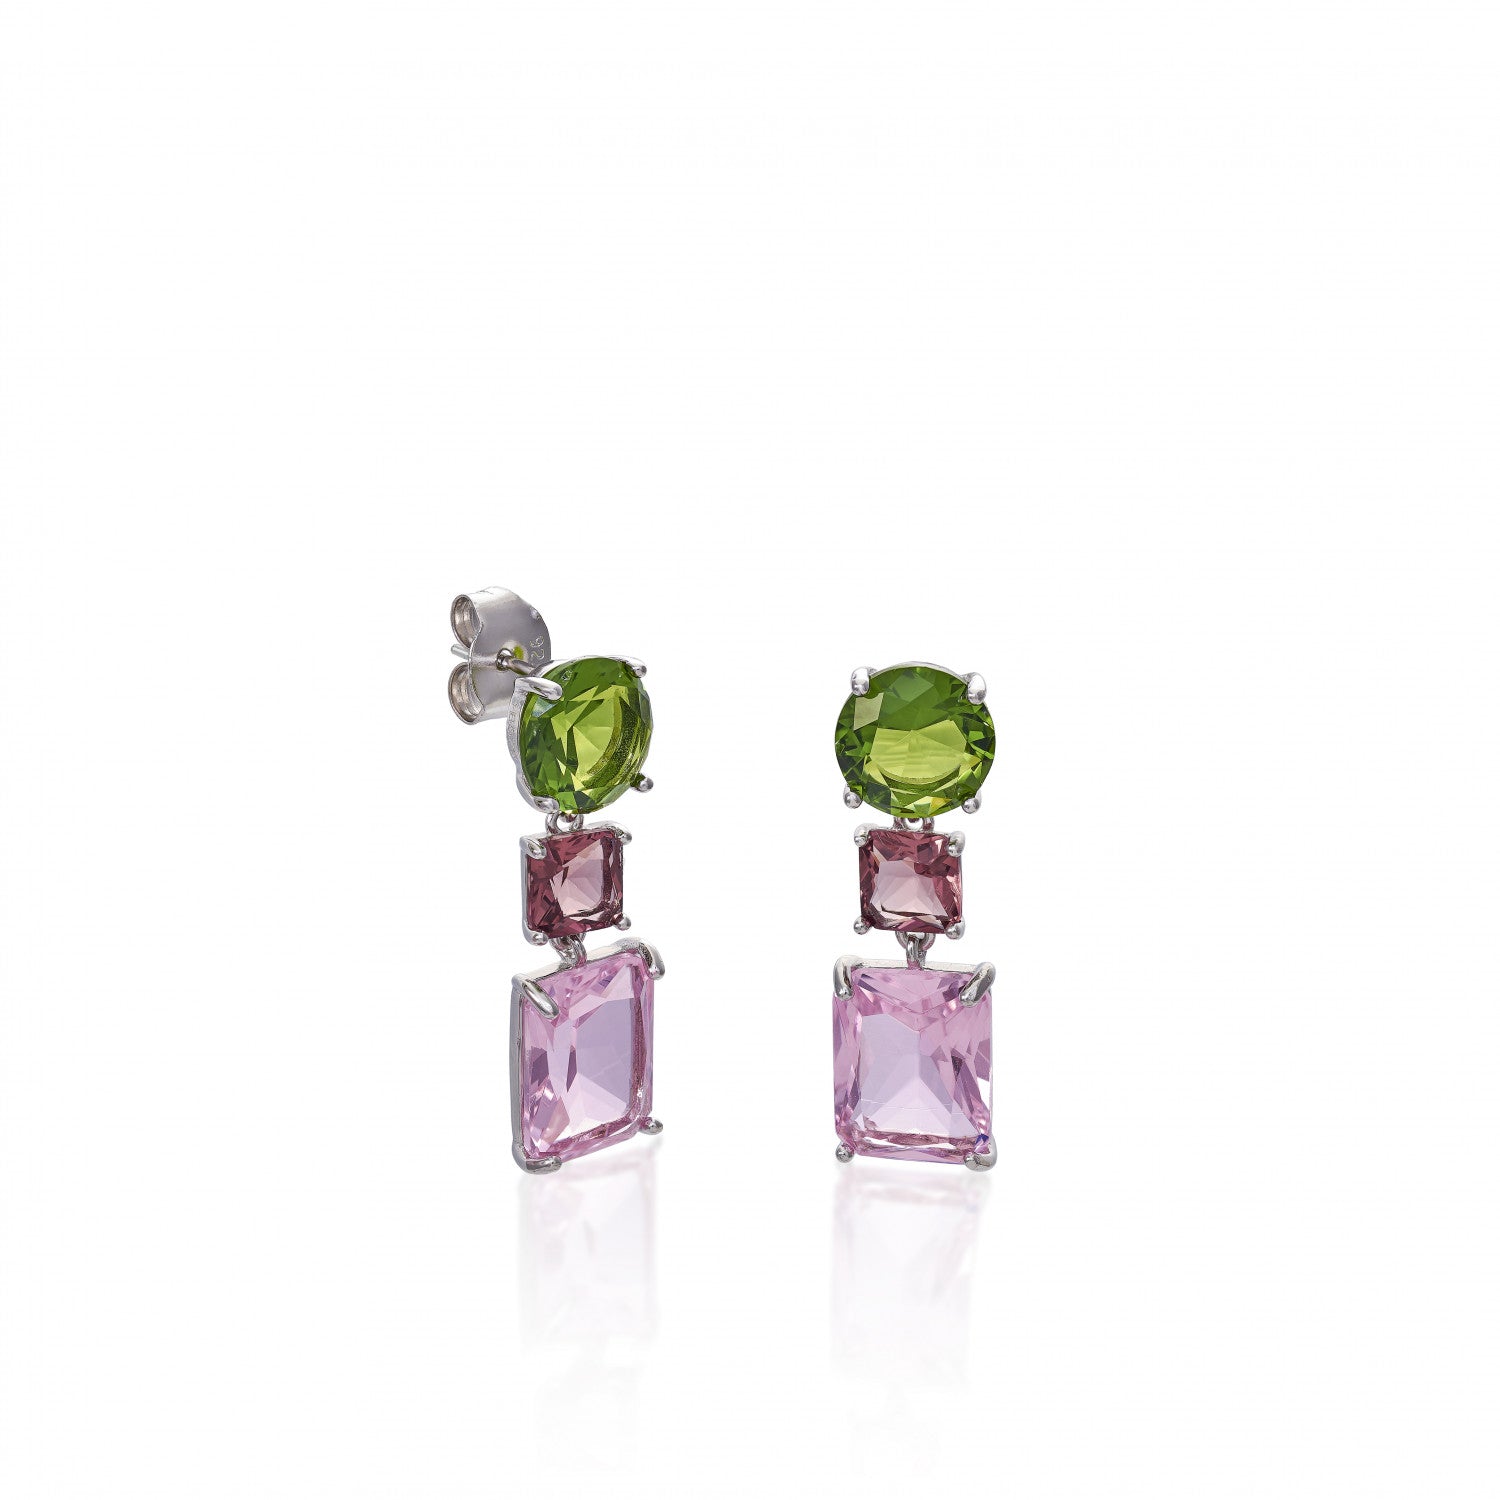 Earrings - Earrings with colored stones transparent design